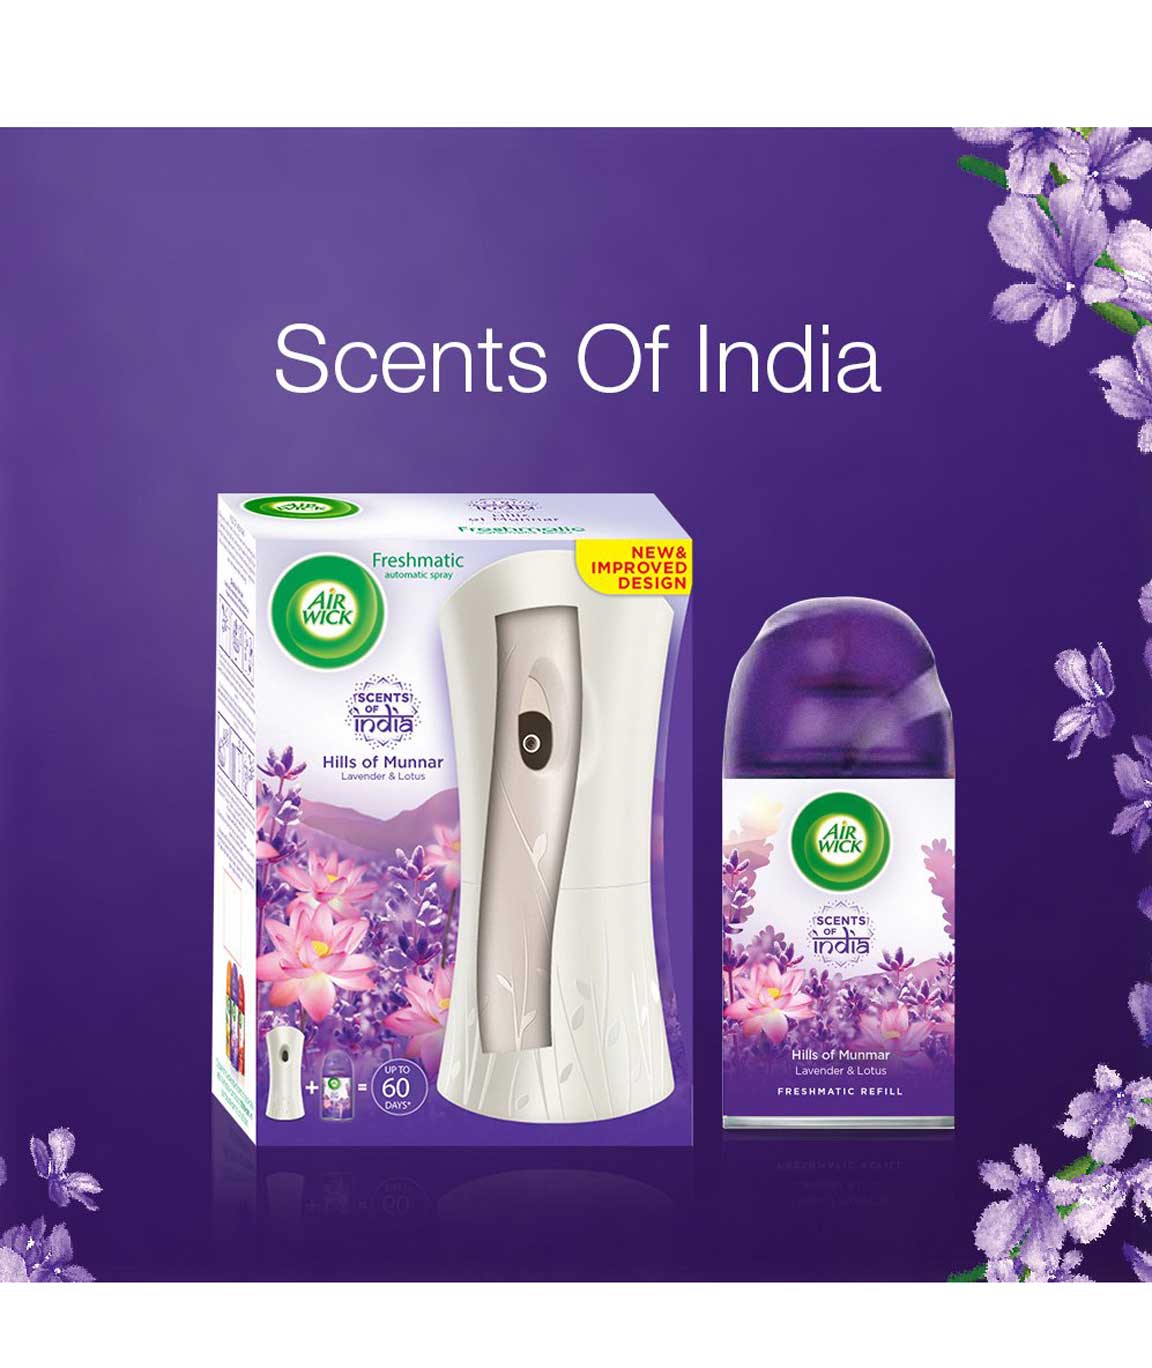 Airwick Freshmatic 'Scents of India' Air-freshner Refill, Hills of Munnar -  250 ml 